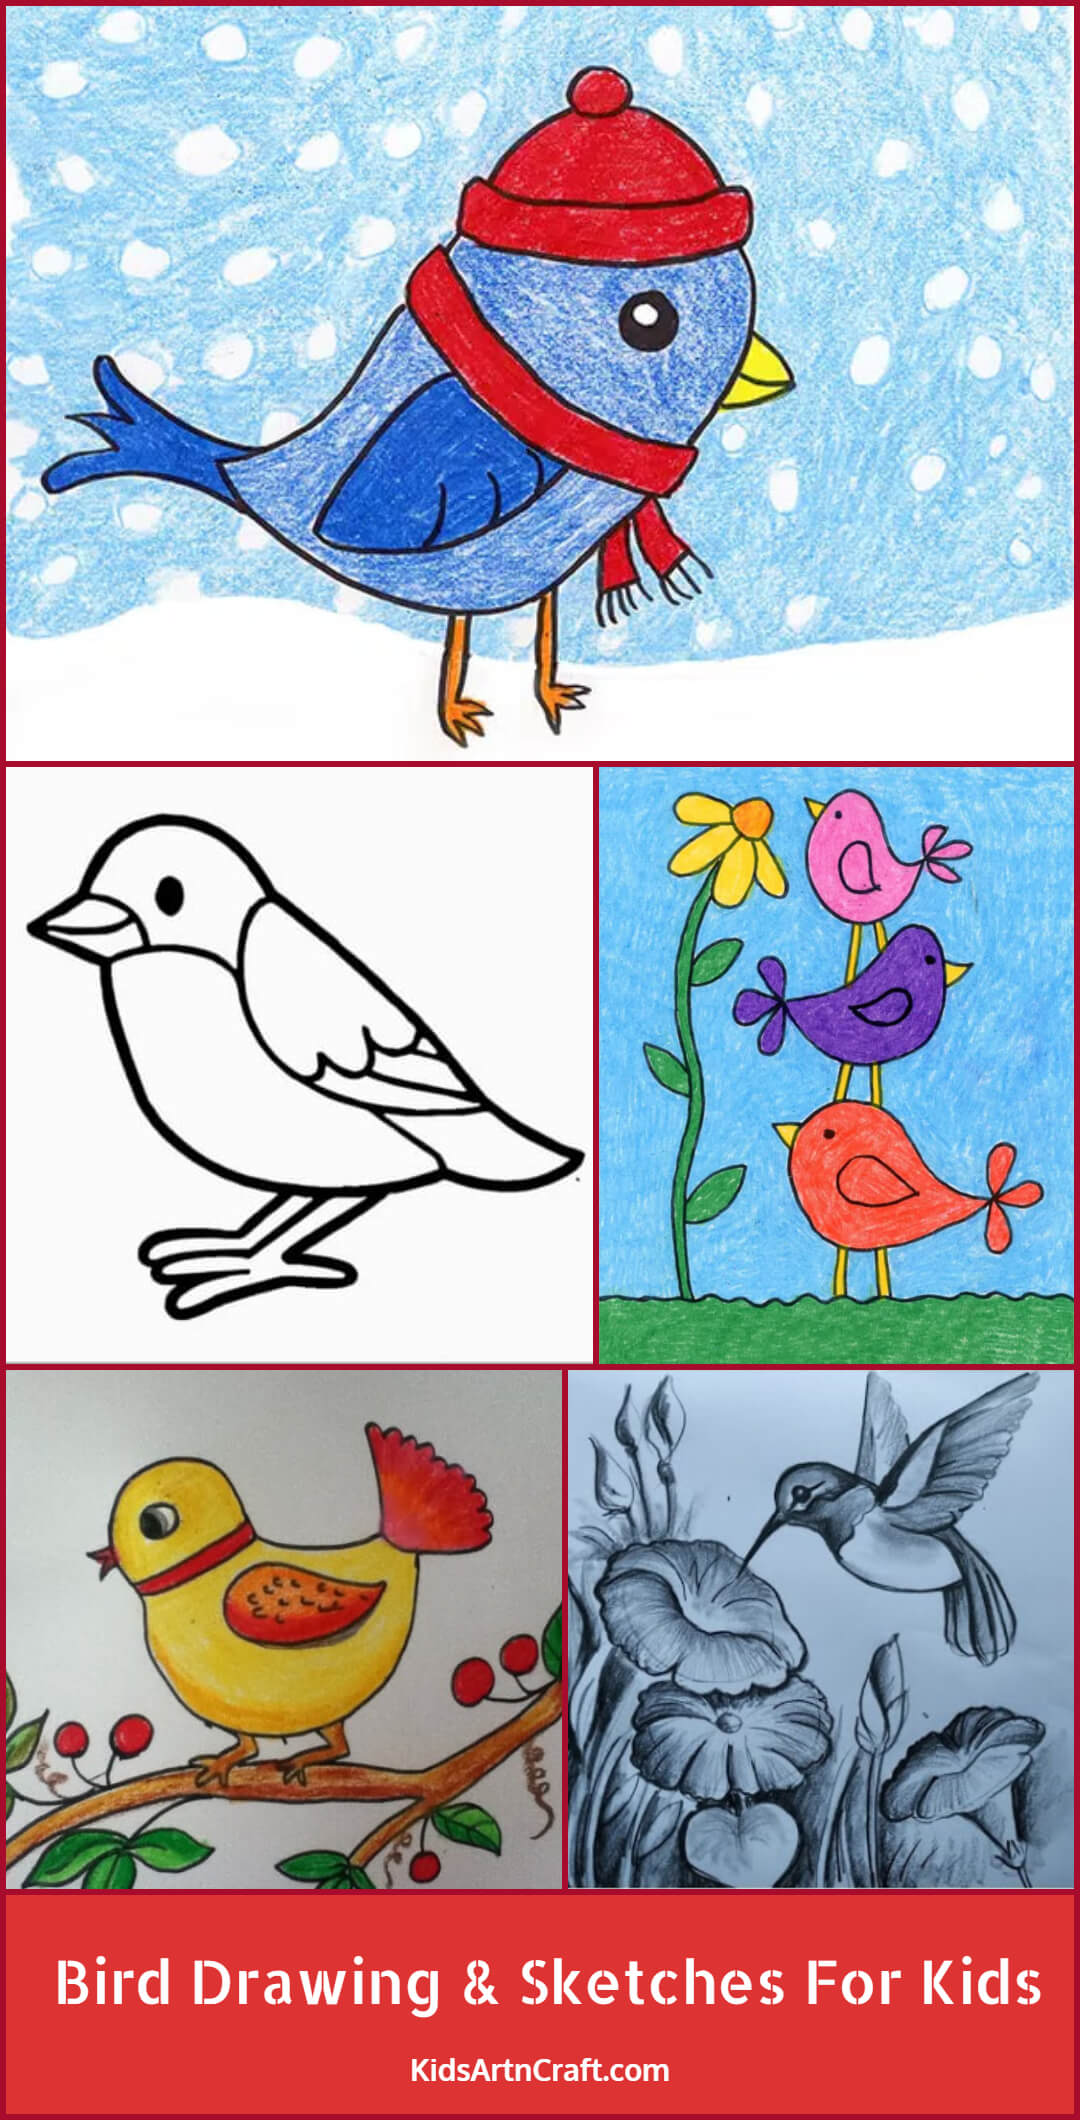 Bird Drawings & Sketches For Kids